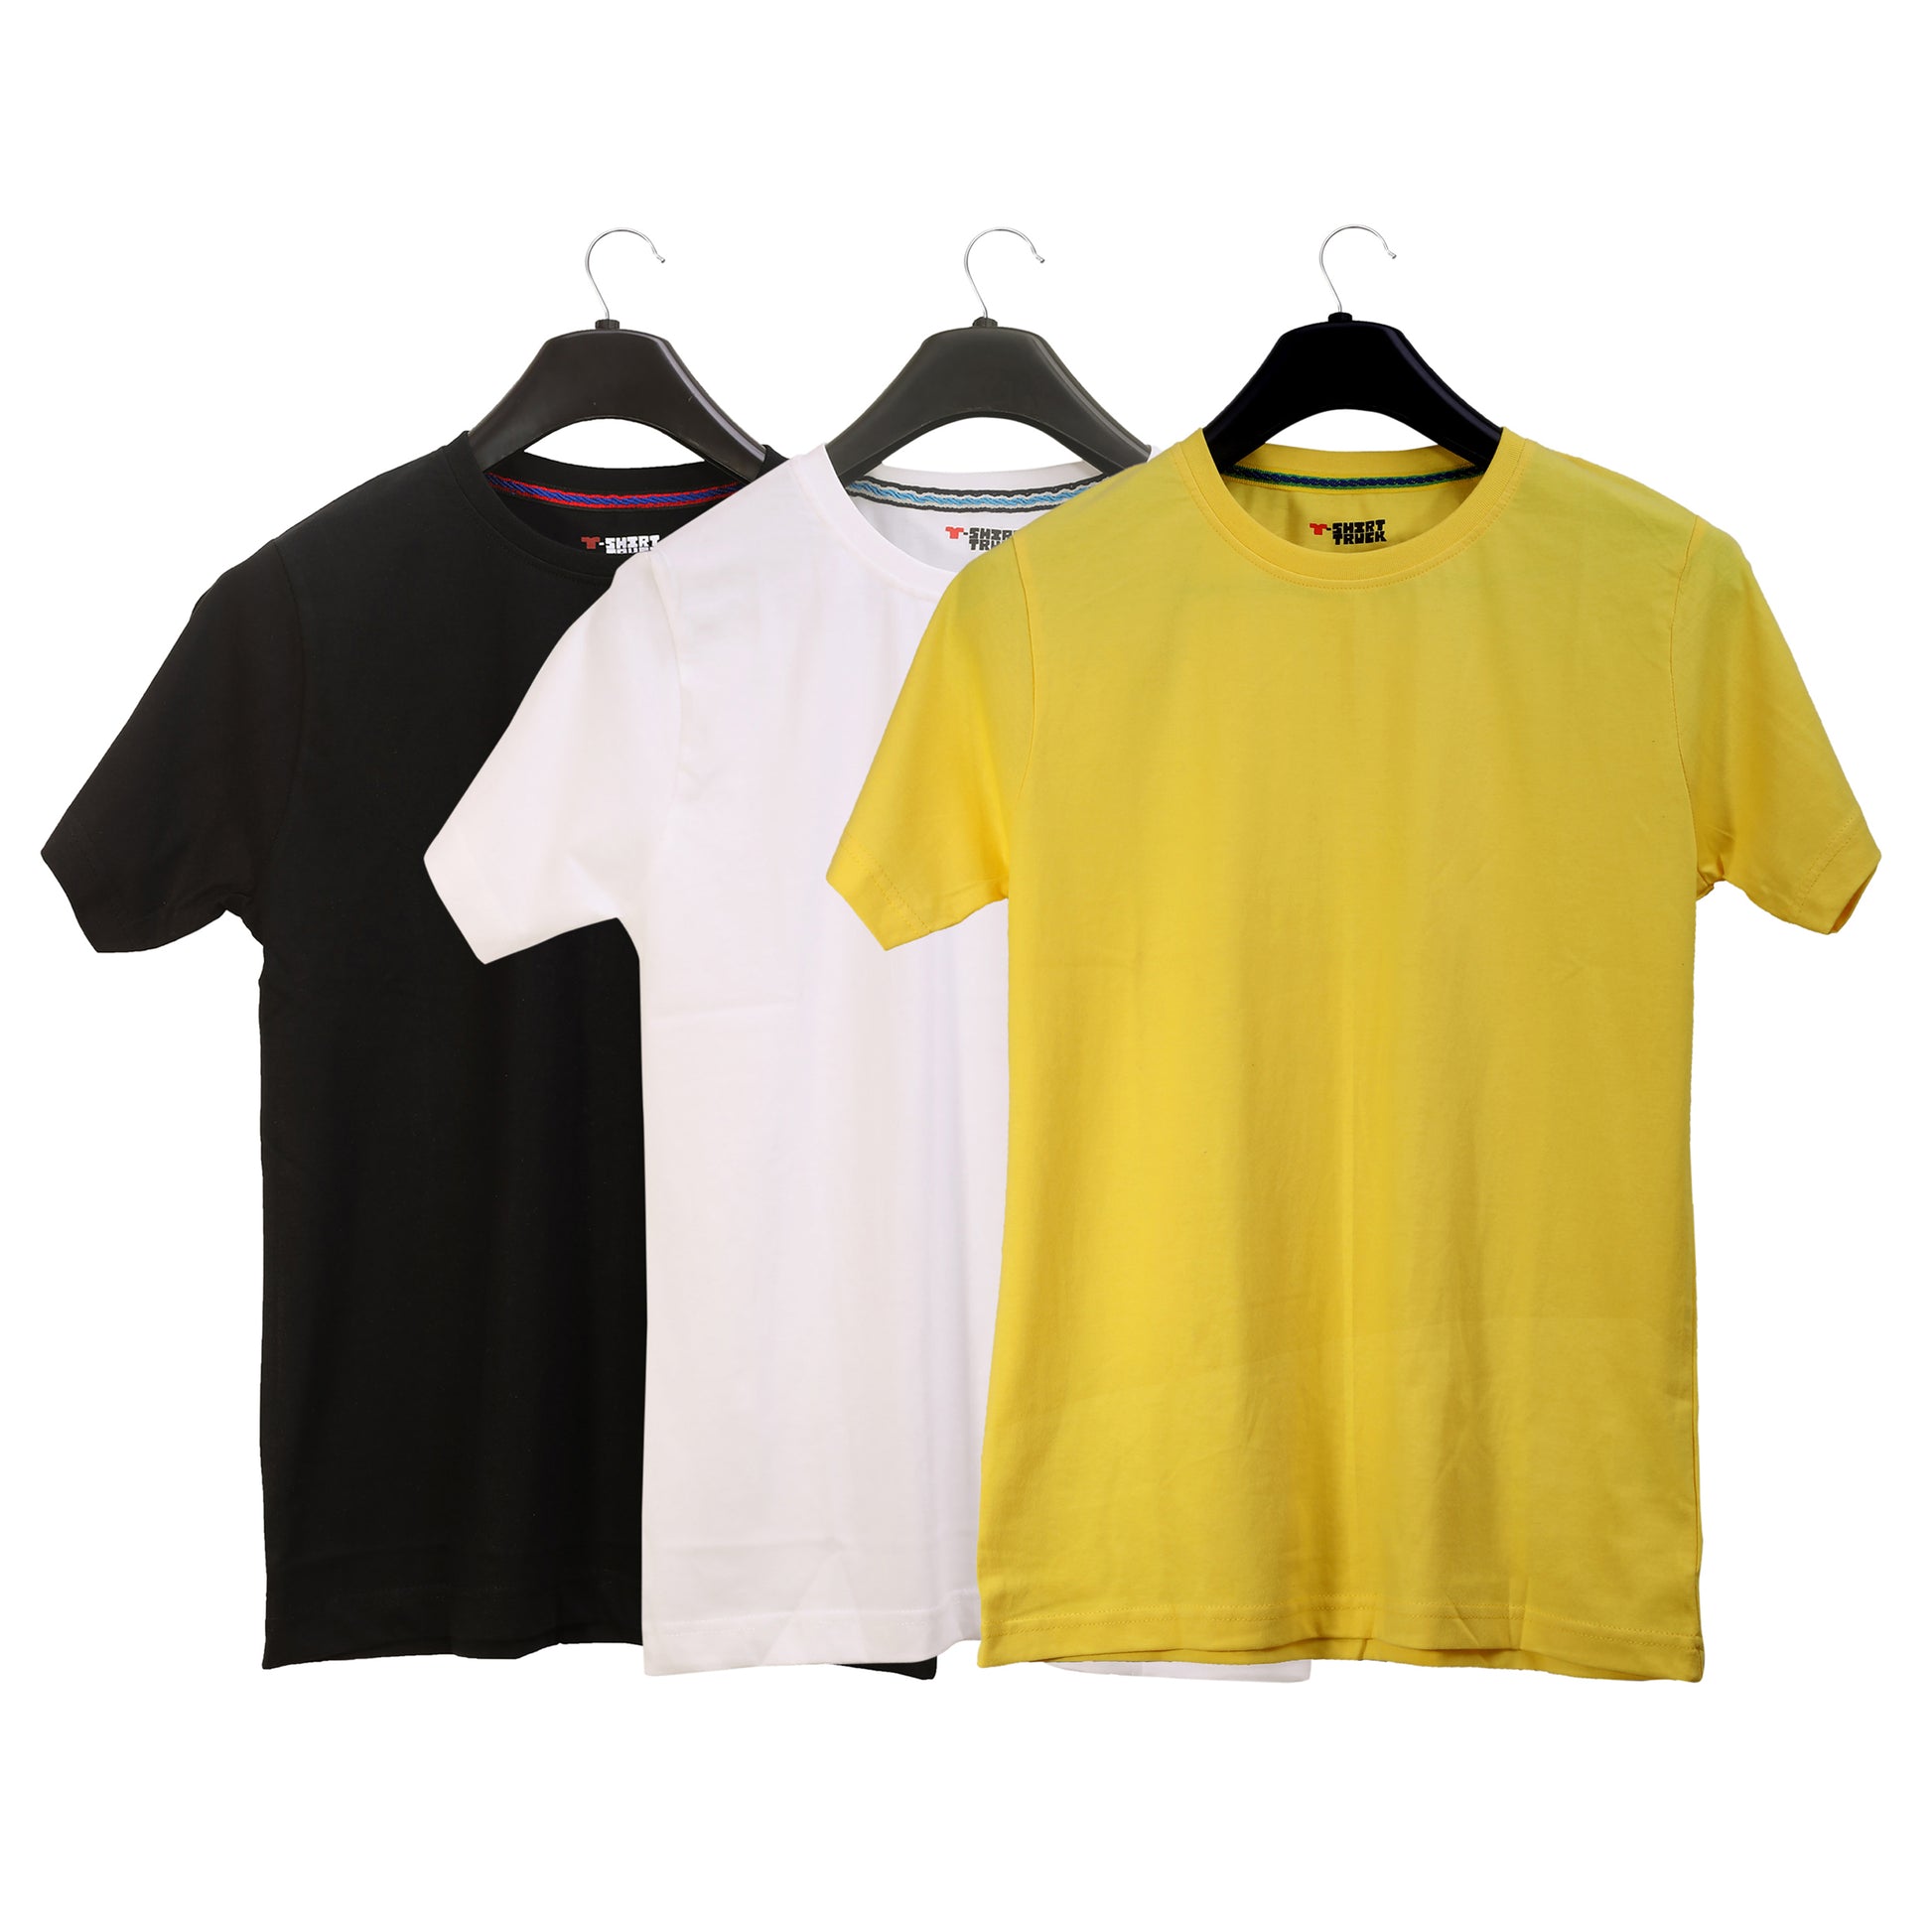 Unisex Round Neck Plain Solid Combo Pack of 3 T-shirts Black, White & Yellow